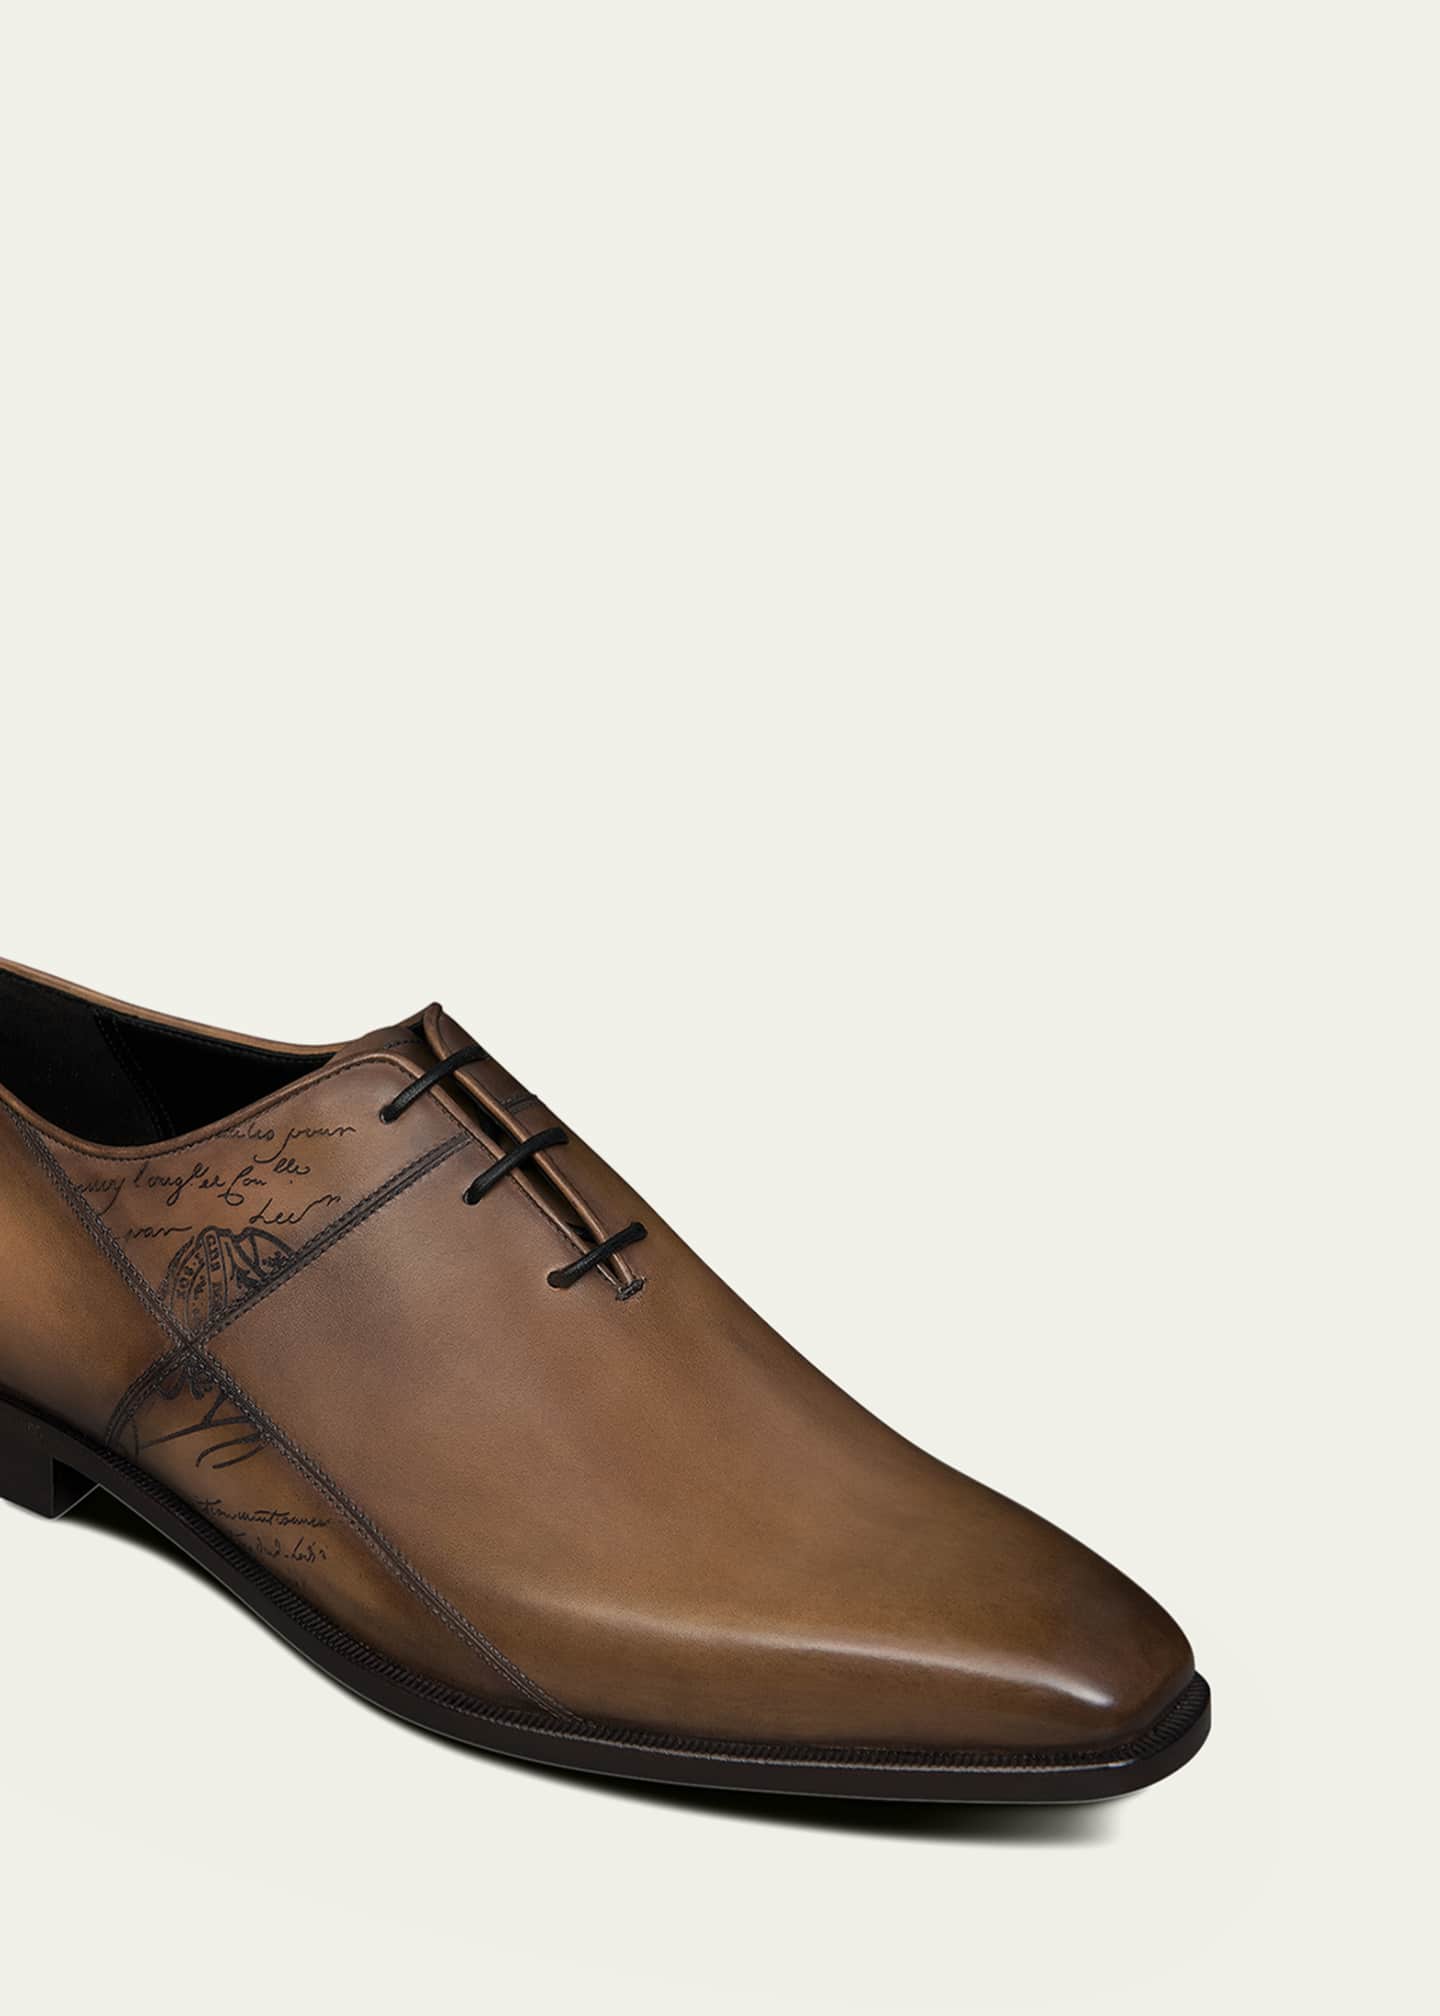 Berluti Alessandro Scars Leather Shoes - 靴